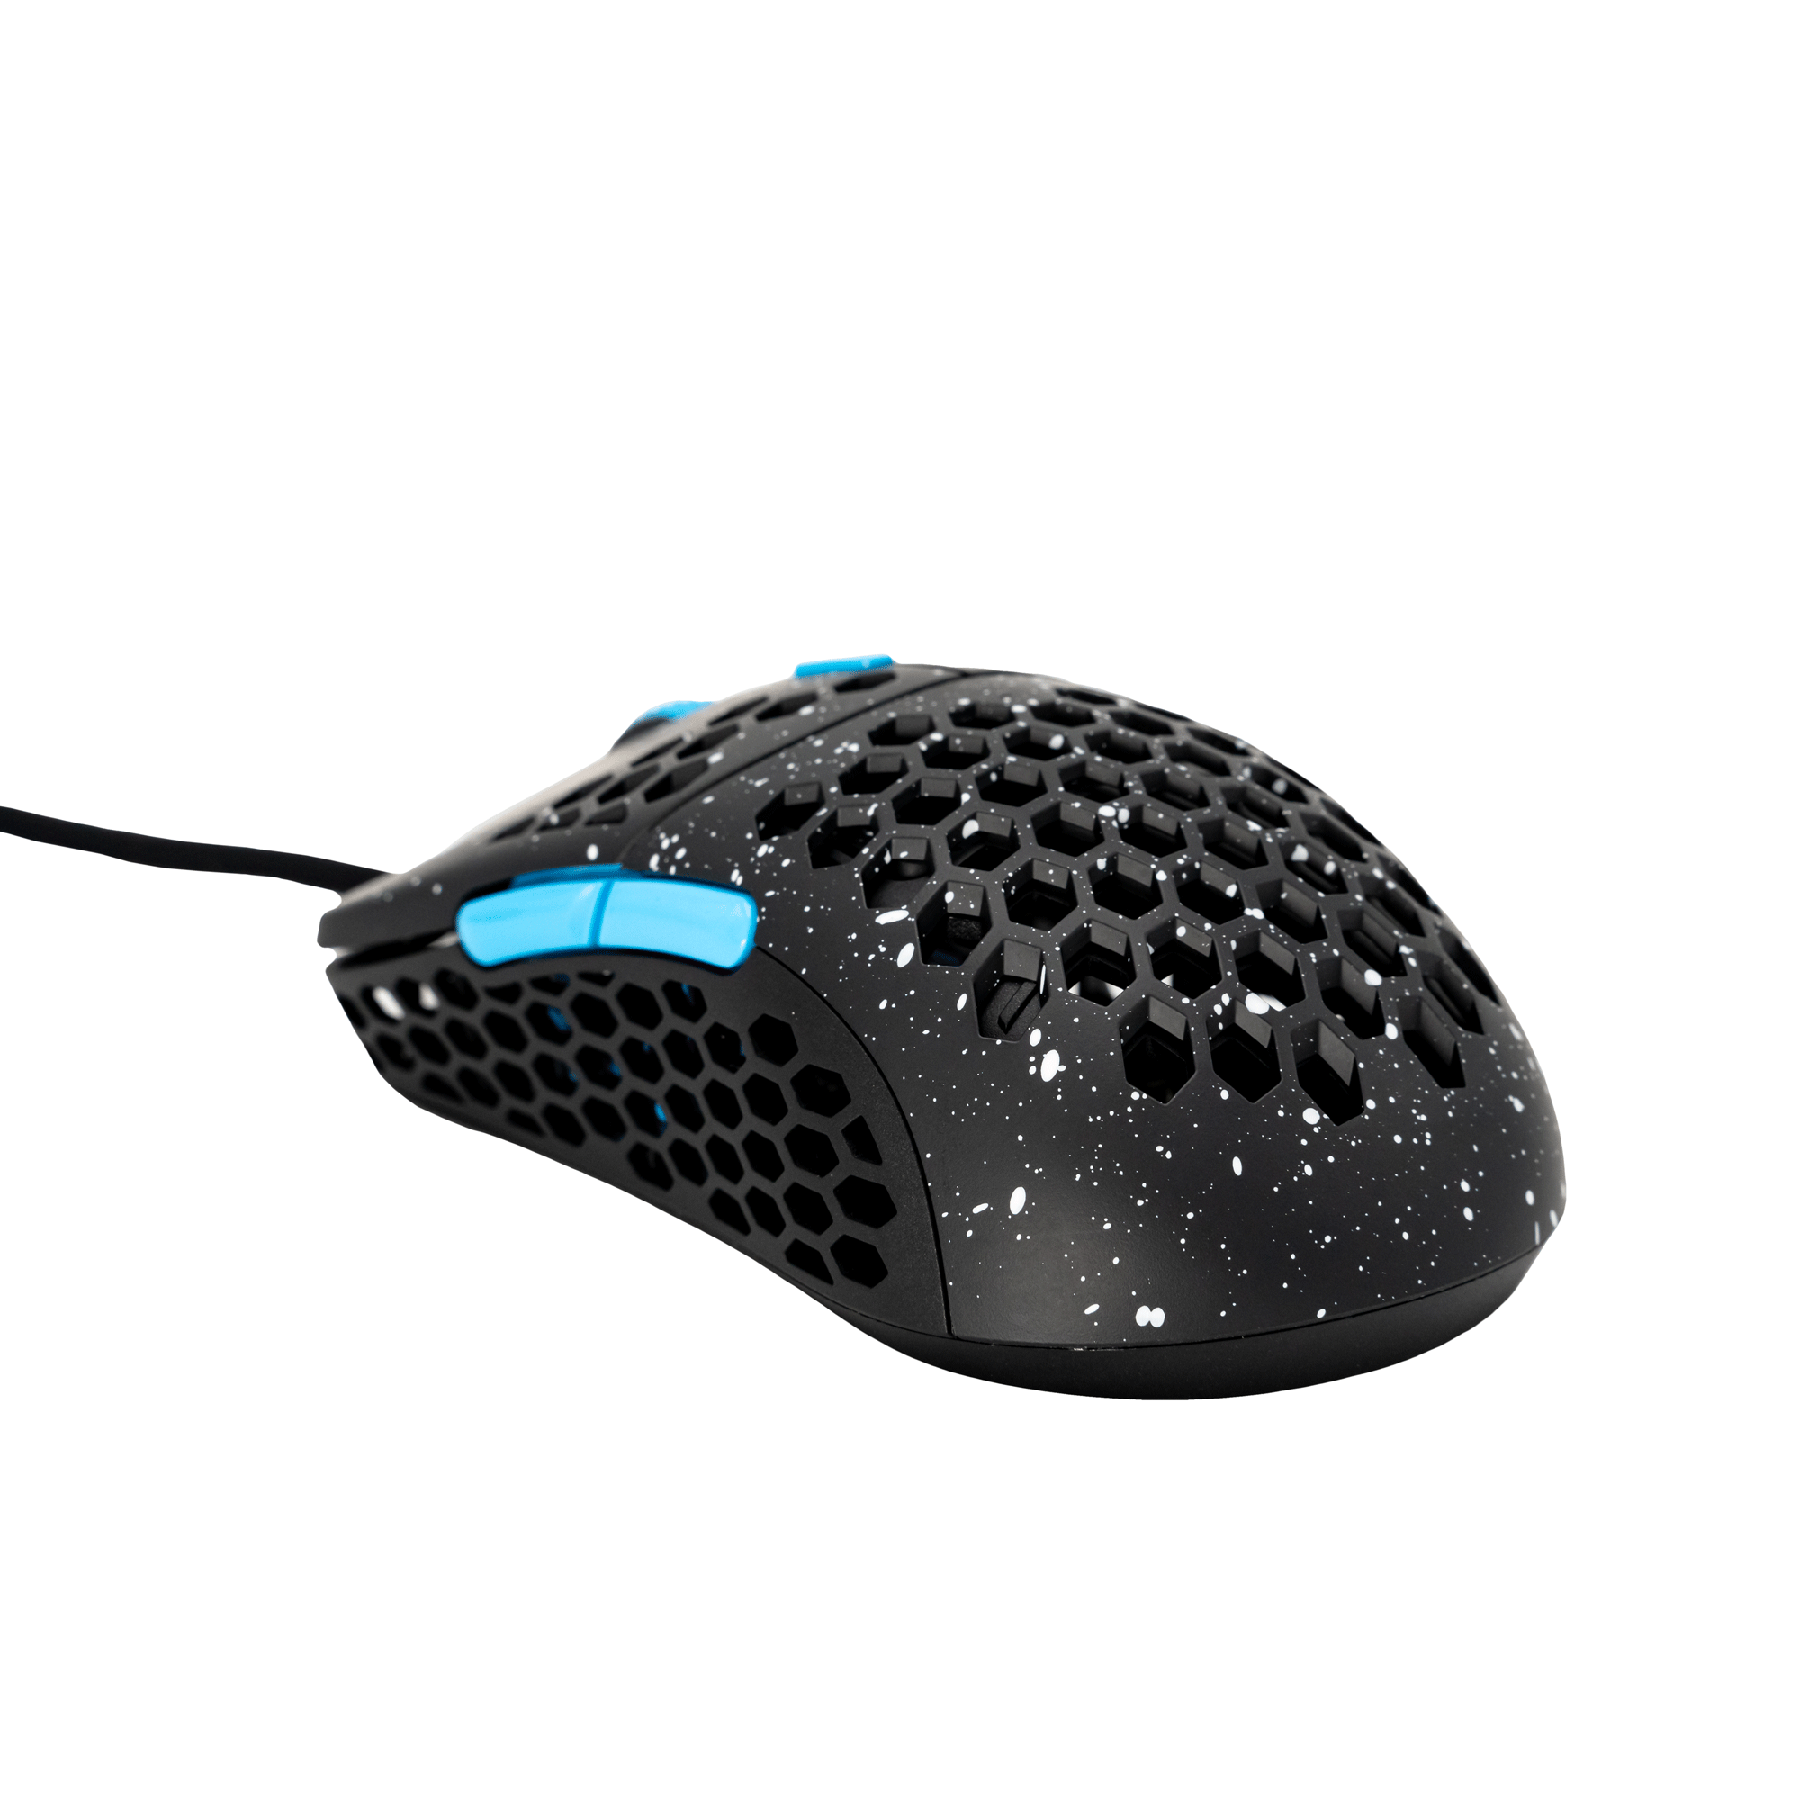 Hati-S HTS ACE Wired Gaming Mouse up to 16000 DPI - 3389 Performance S